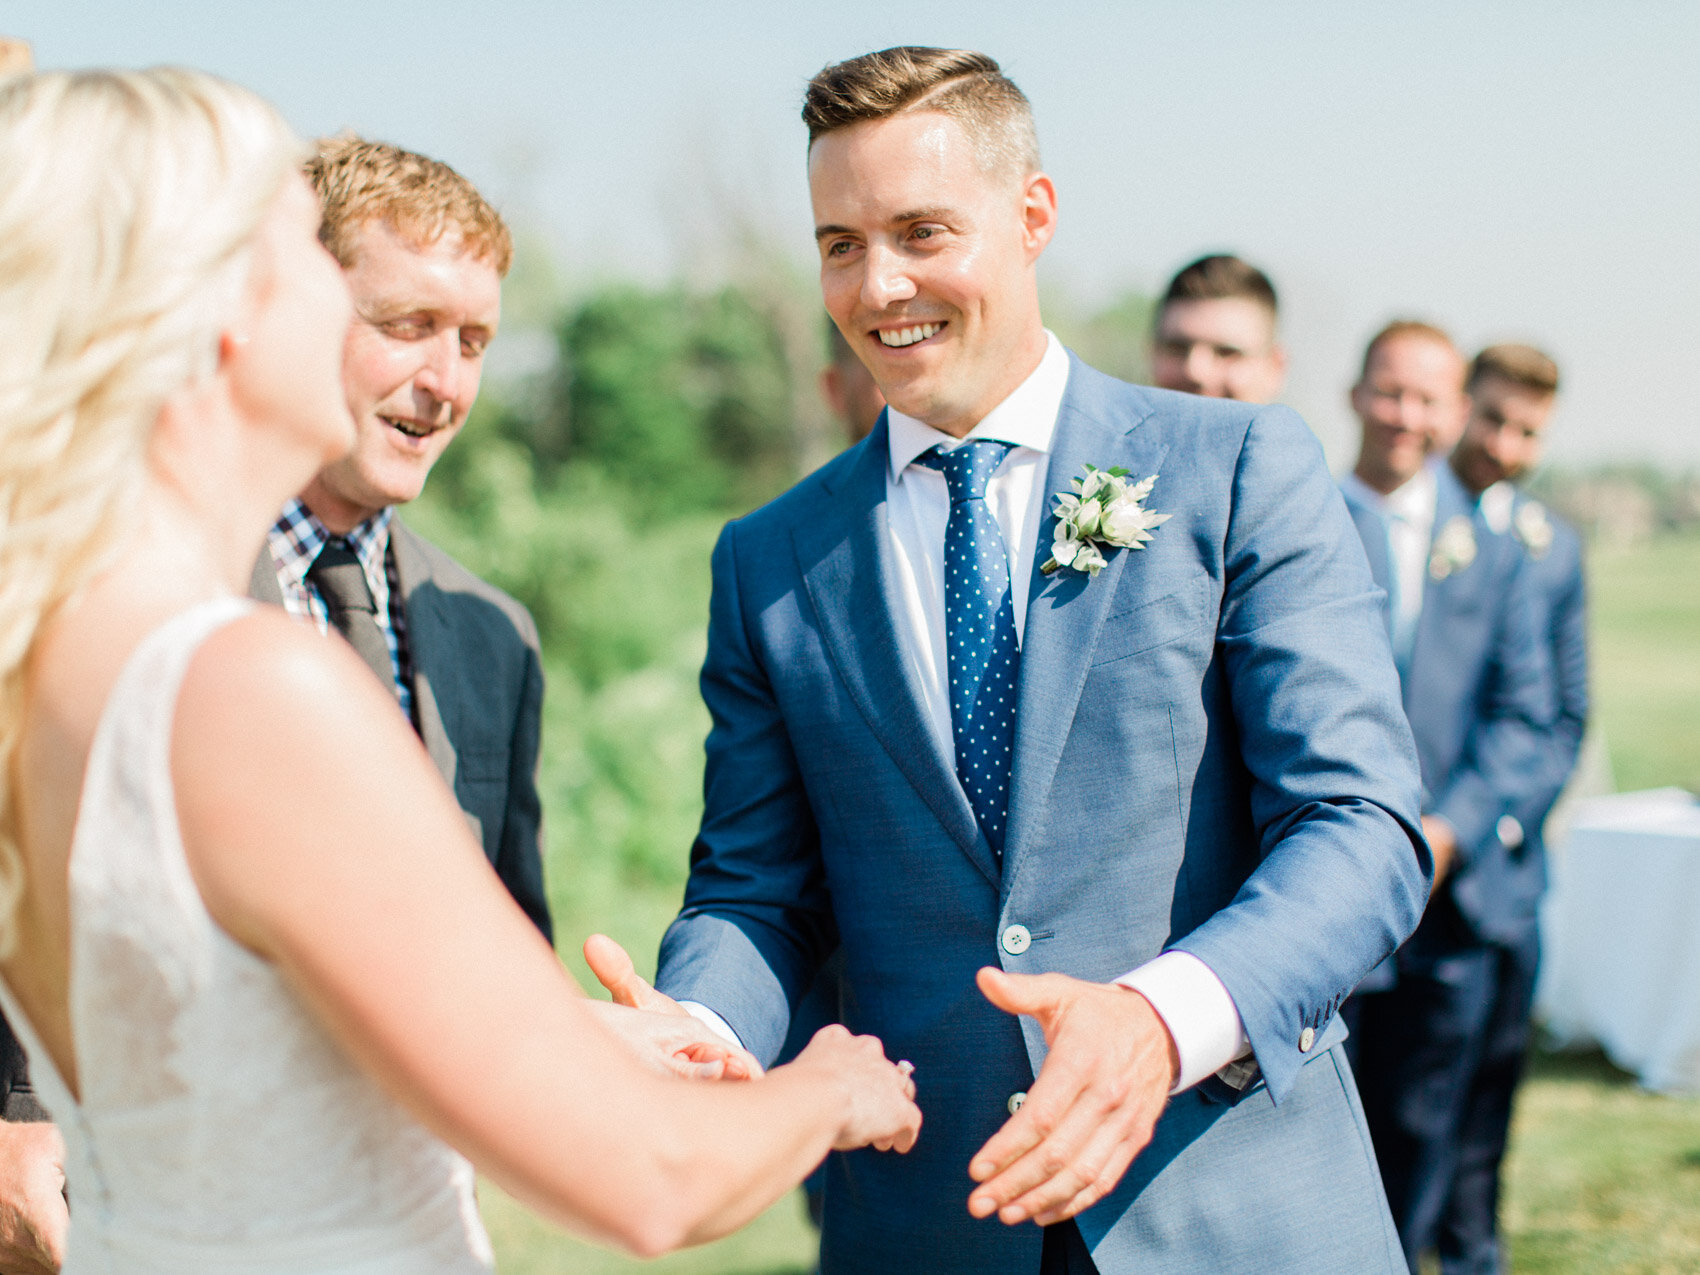 groom smiling at his bride during their outdoor summer wedding ceremony